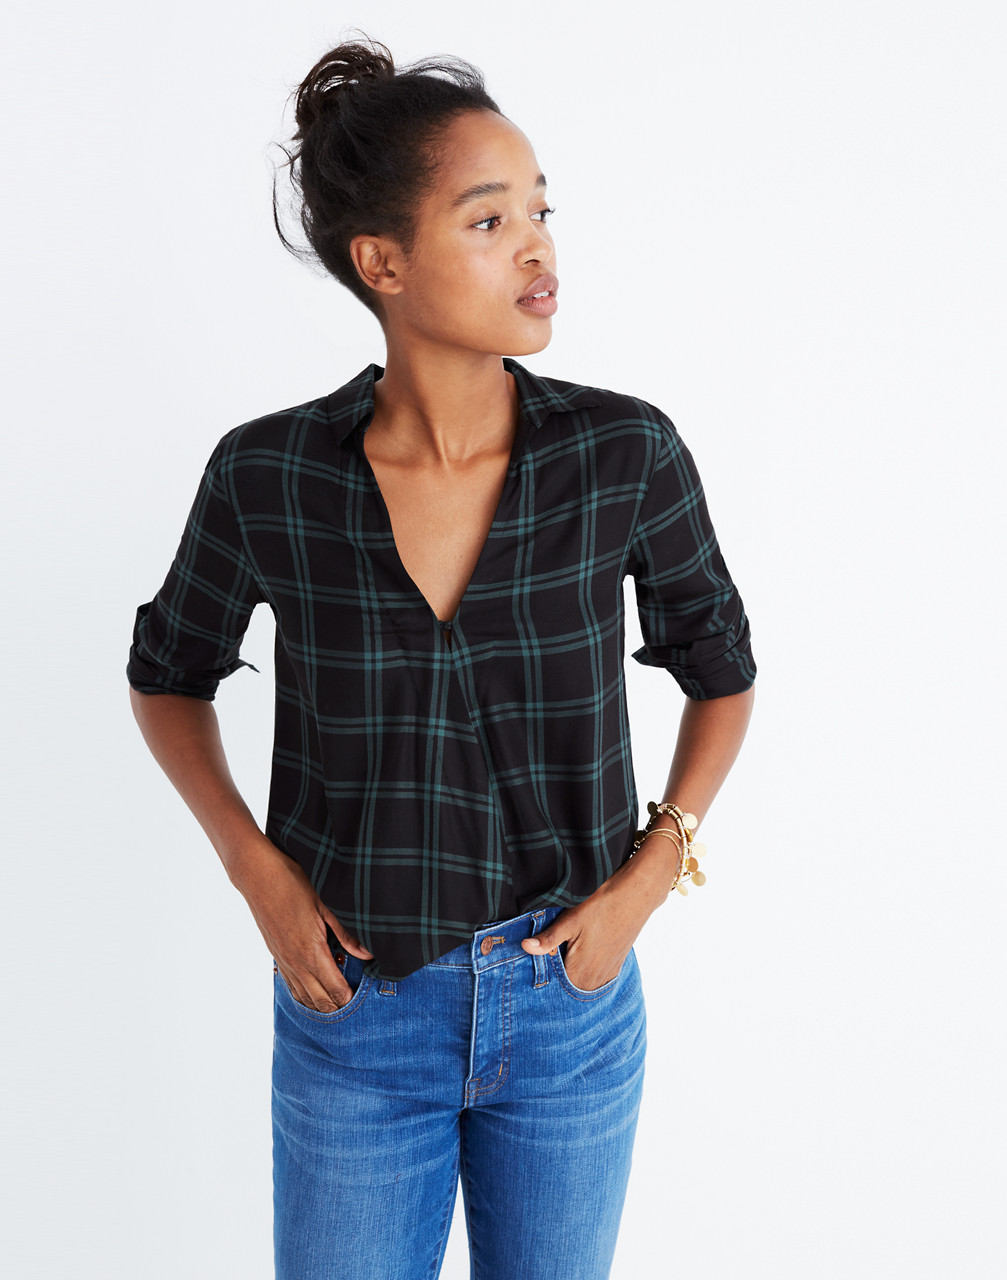 Wrap-Front Shirt in Palma Plaid in old vine image 1